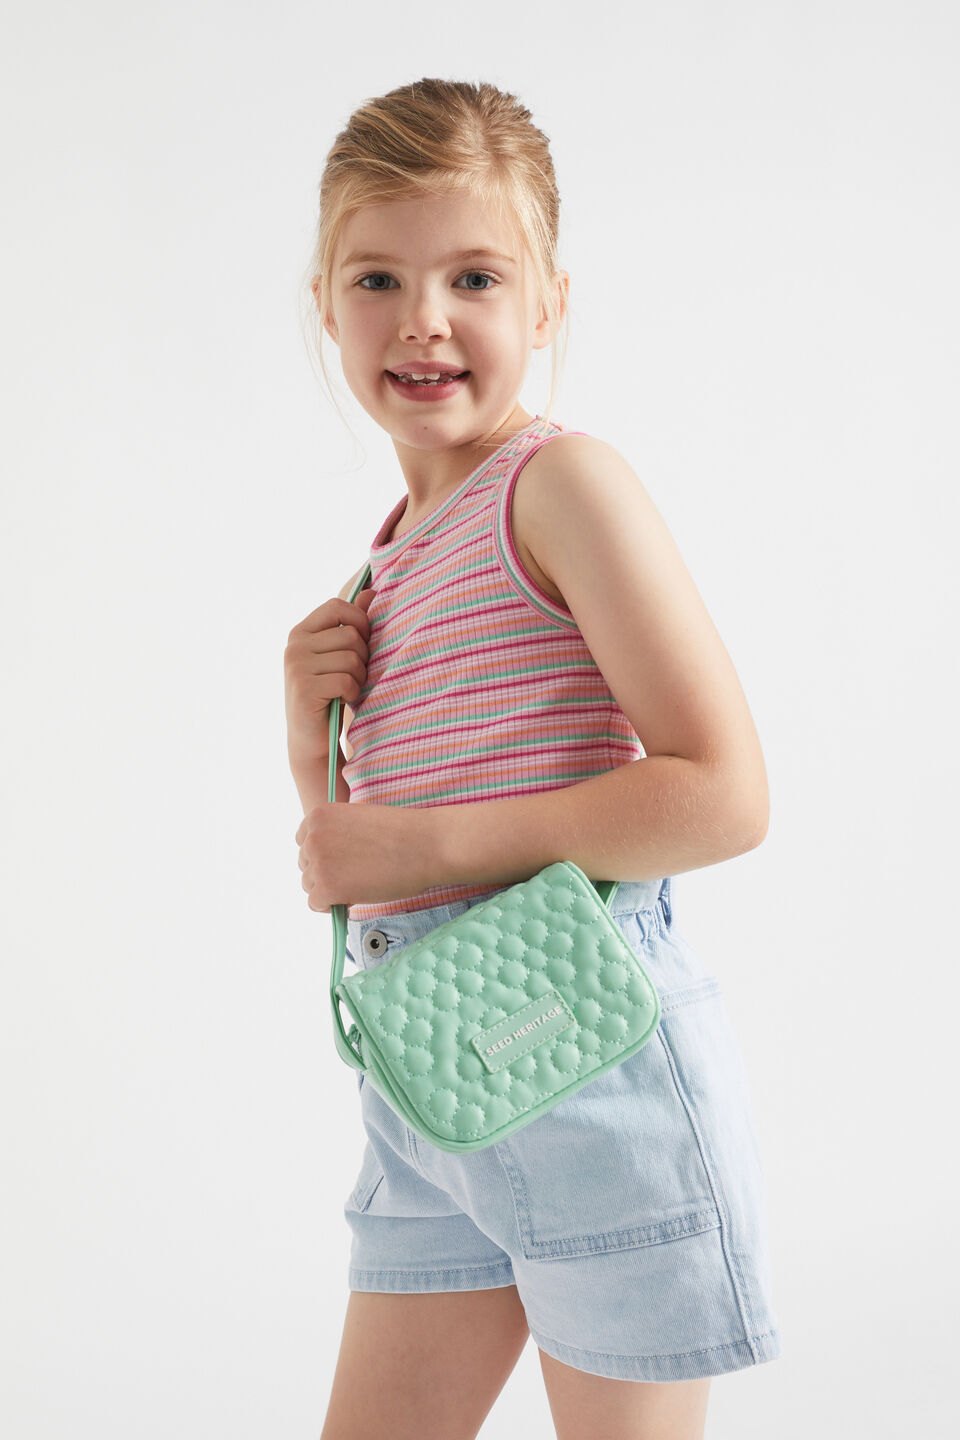 Daisy Quilted Cross Body Bag  Spearmint